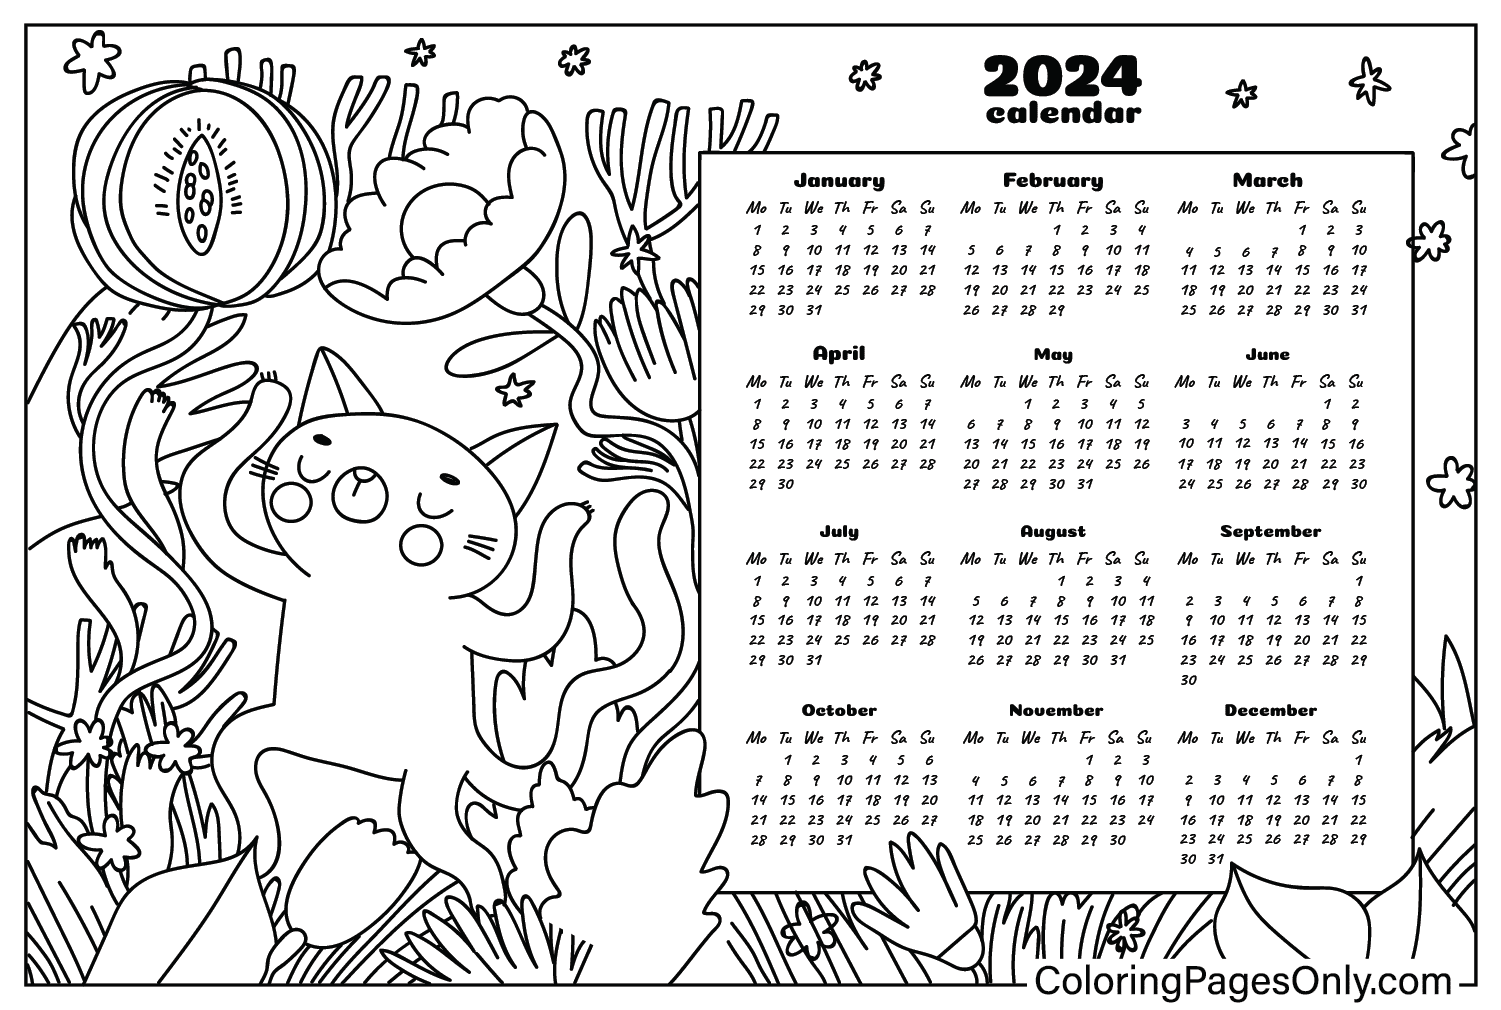 Calendar 2024 Coloring Page Printable Free Printable Coloring Pages